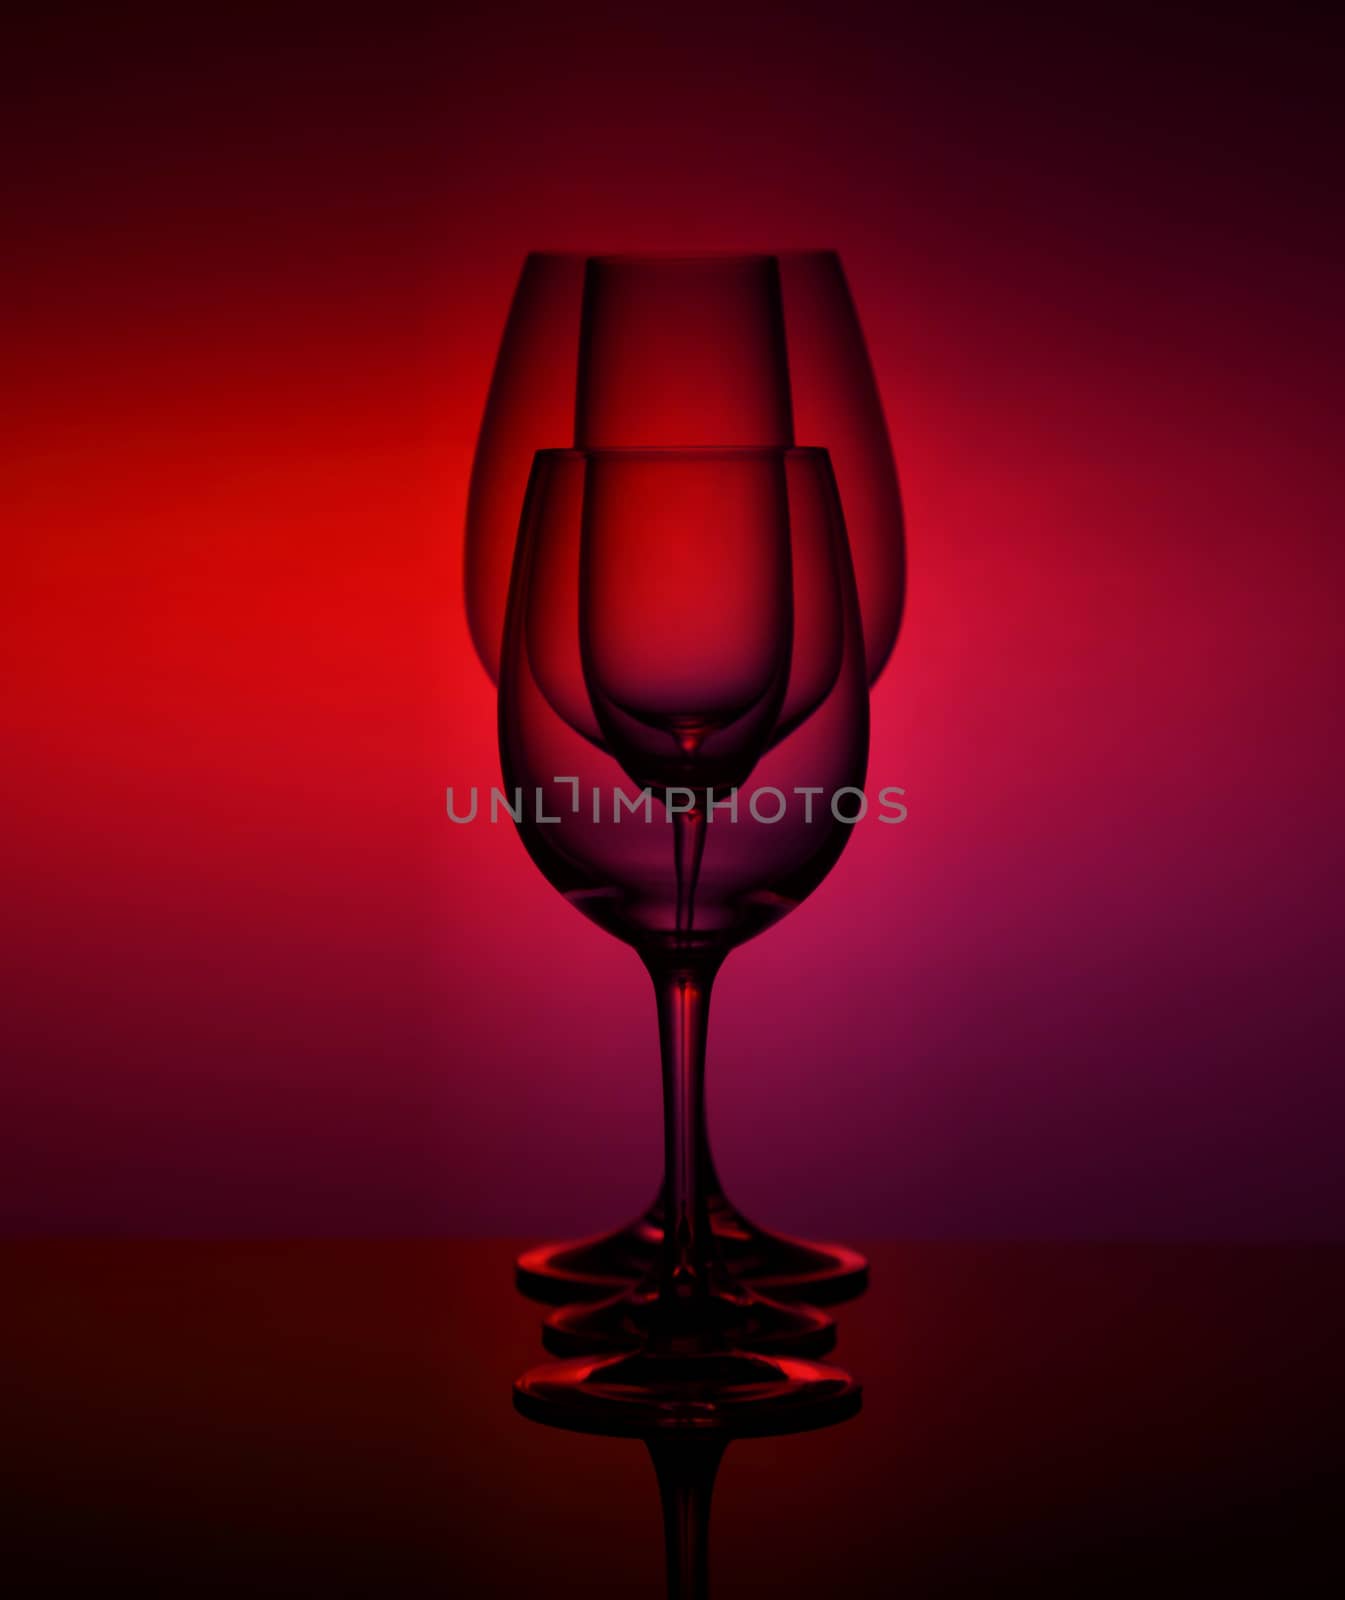 close-Up view Of various empty Glasses Against Colored Background by galinasharapova